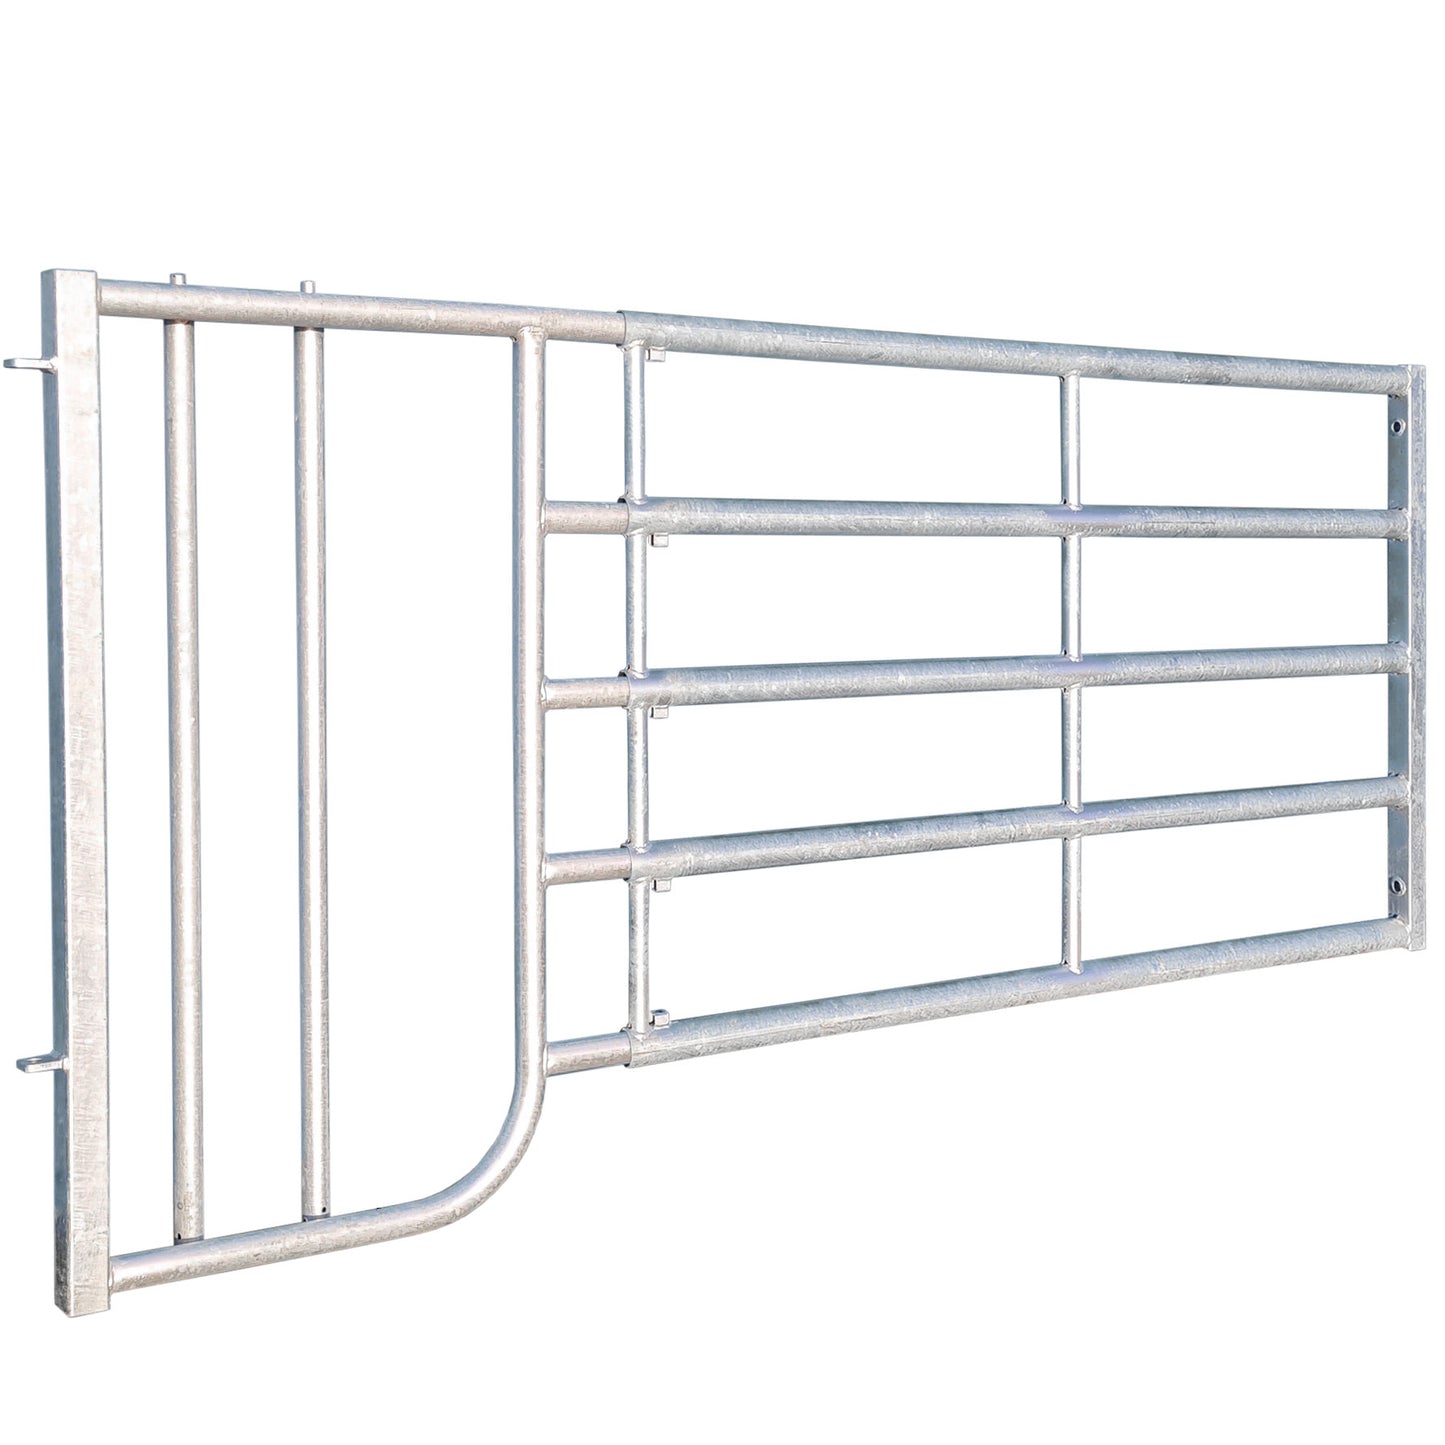 Pedigree 5 Bar Extendable Panel with Calf Creep Attachment